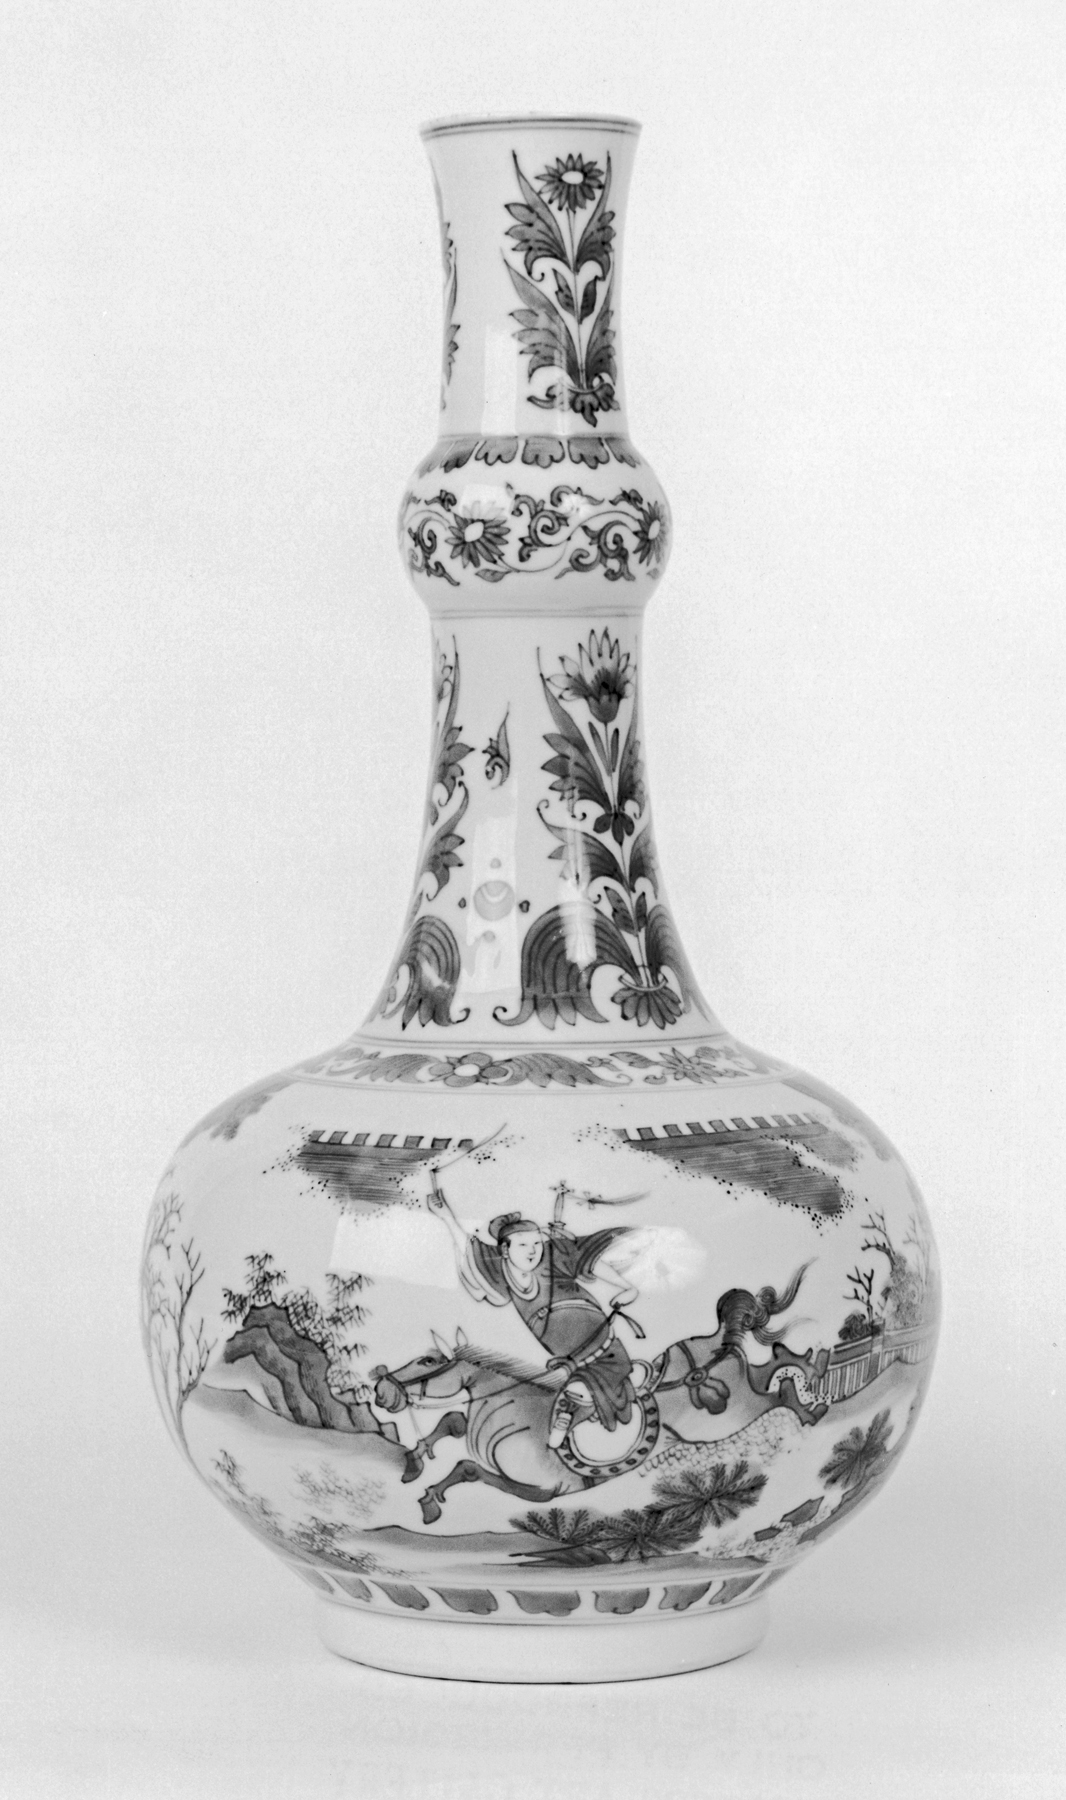 Image for Blue and White Bottle with Scenes from a Novel